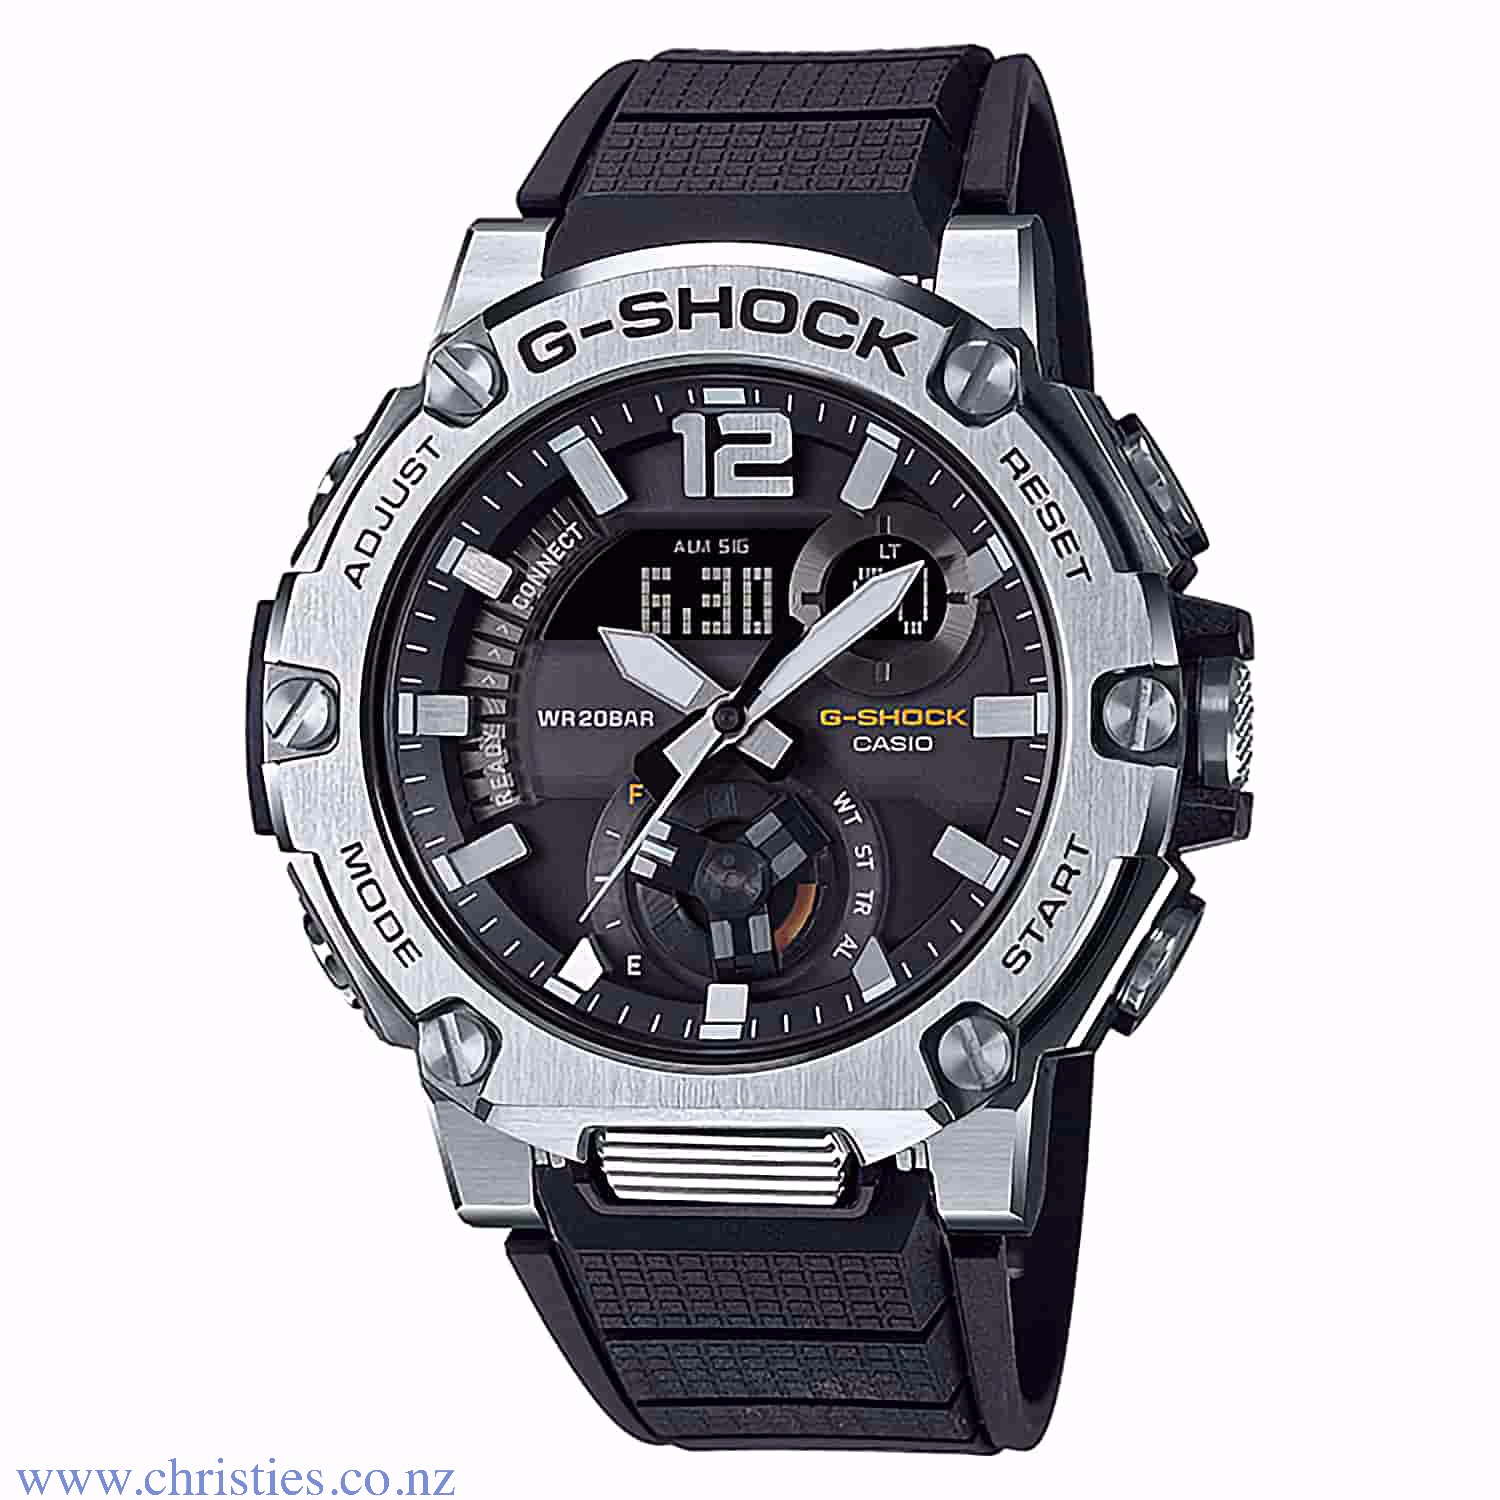 GSTB300S-1A Casio G-Shock G-STEEL Watch. From G-SHOCK, the watch brand that is constantly setting new standards for timekeeping toughness, come new rugged style G-STEEL models that feature Carbon Core Guard structures. This new model adopts tough G-SHOCK 